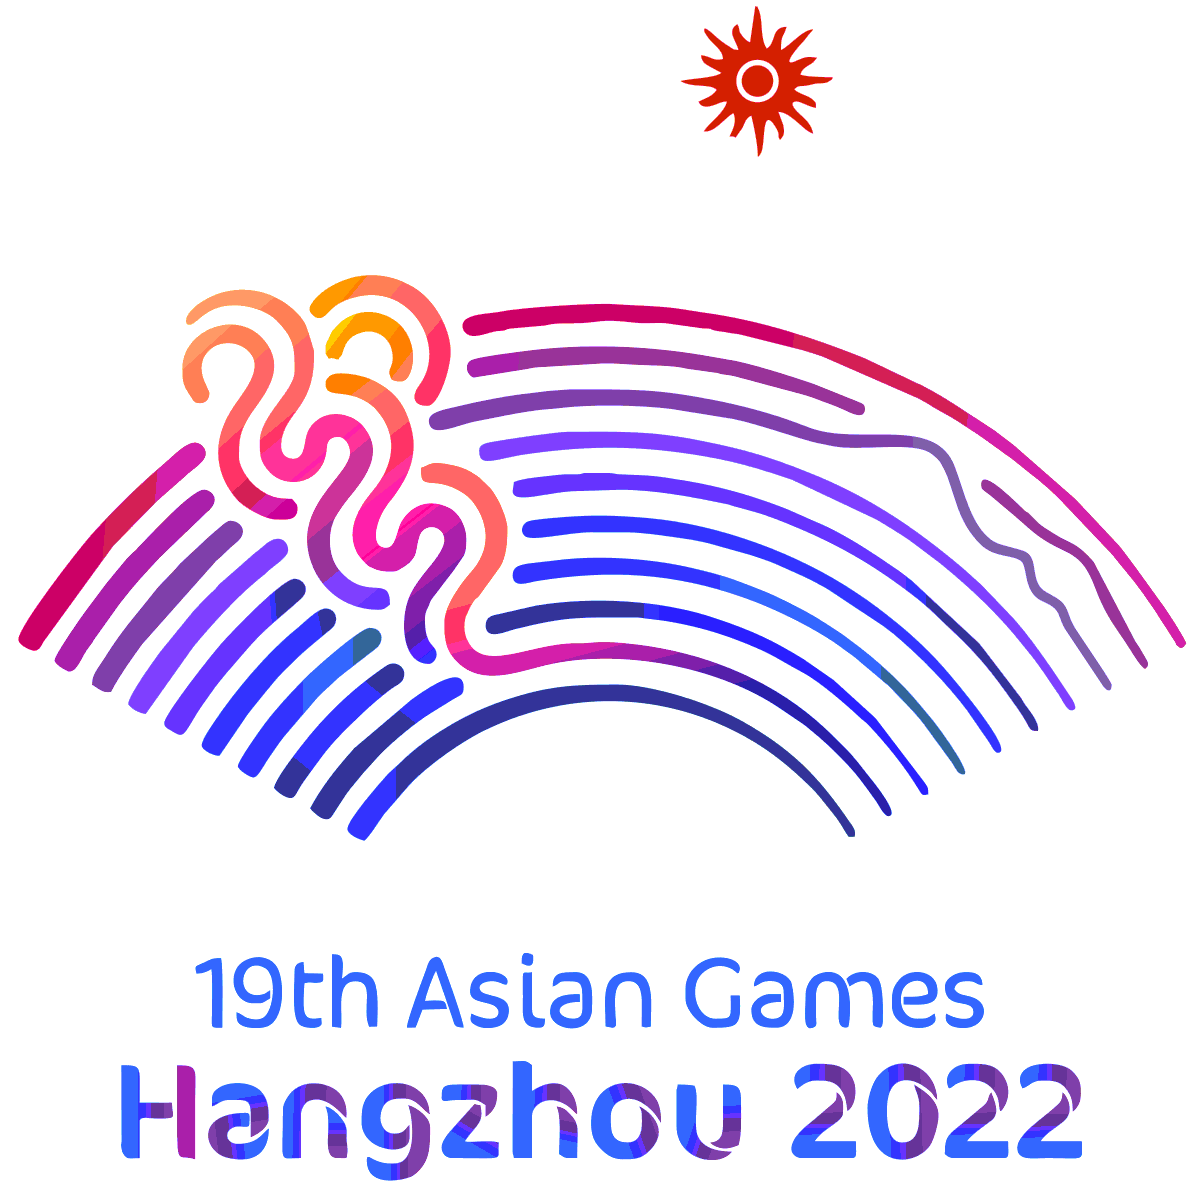 19th Asian Games